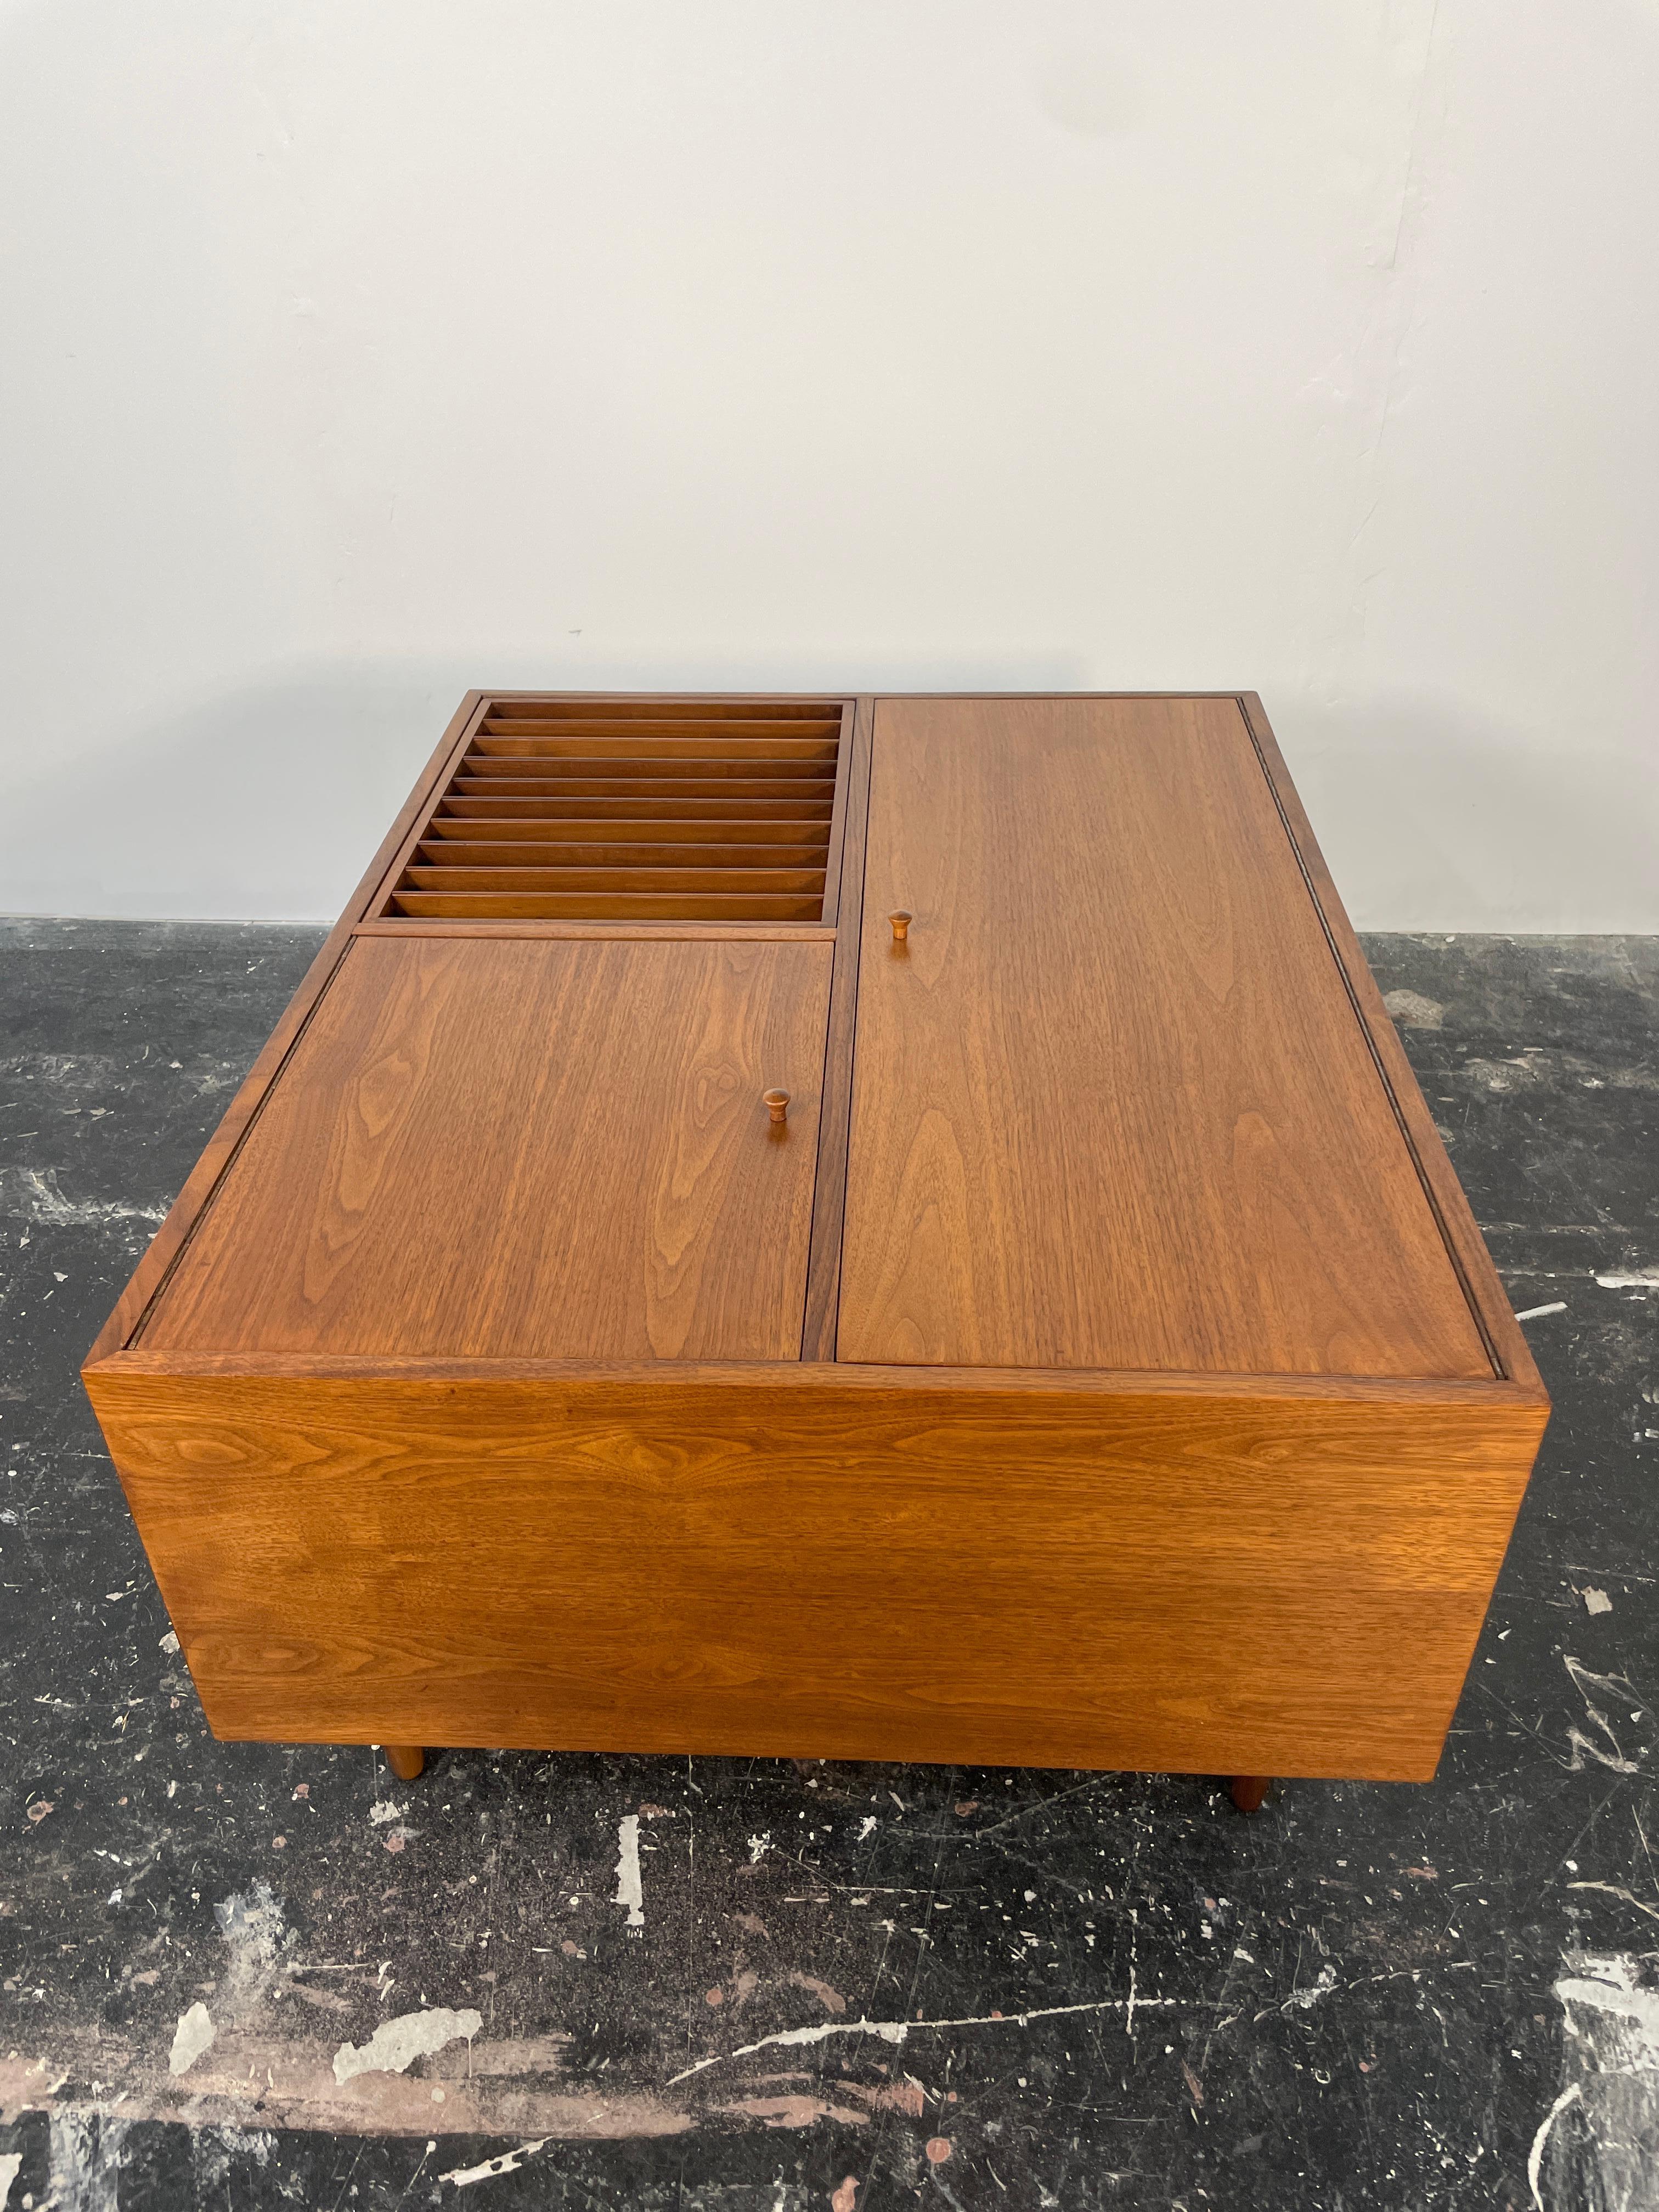 Rare large walnut coffee table by Milo Baughman for Glenn of California c.1950s, USA. This unique table features ample storage with two deep hinged cabinet doors. The cabinets open to reveal one large storage cabinet and a divided storage cabinet. A